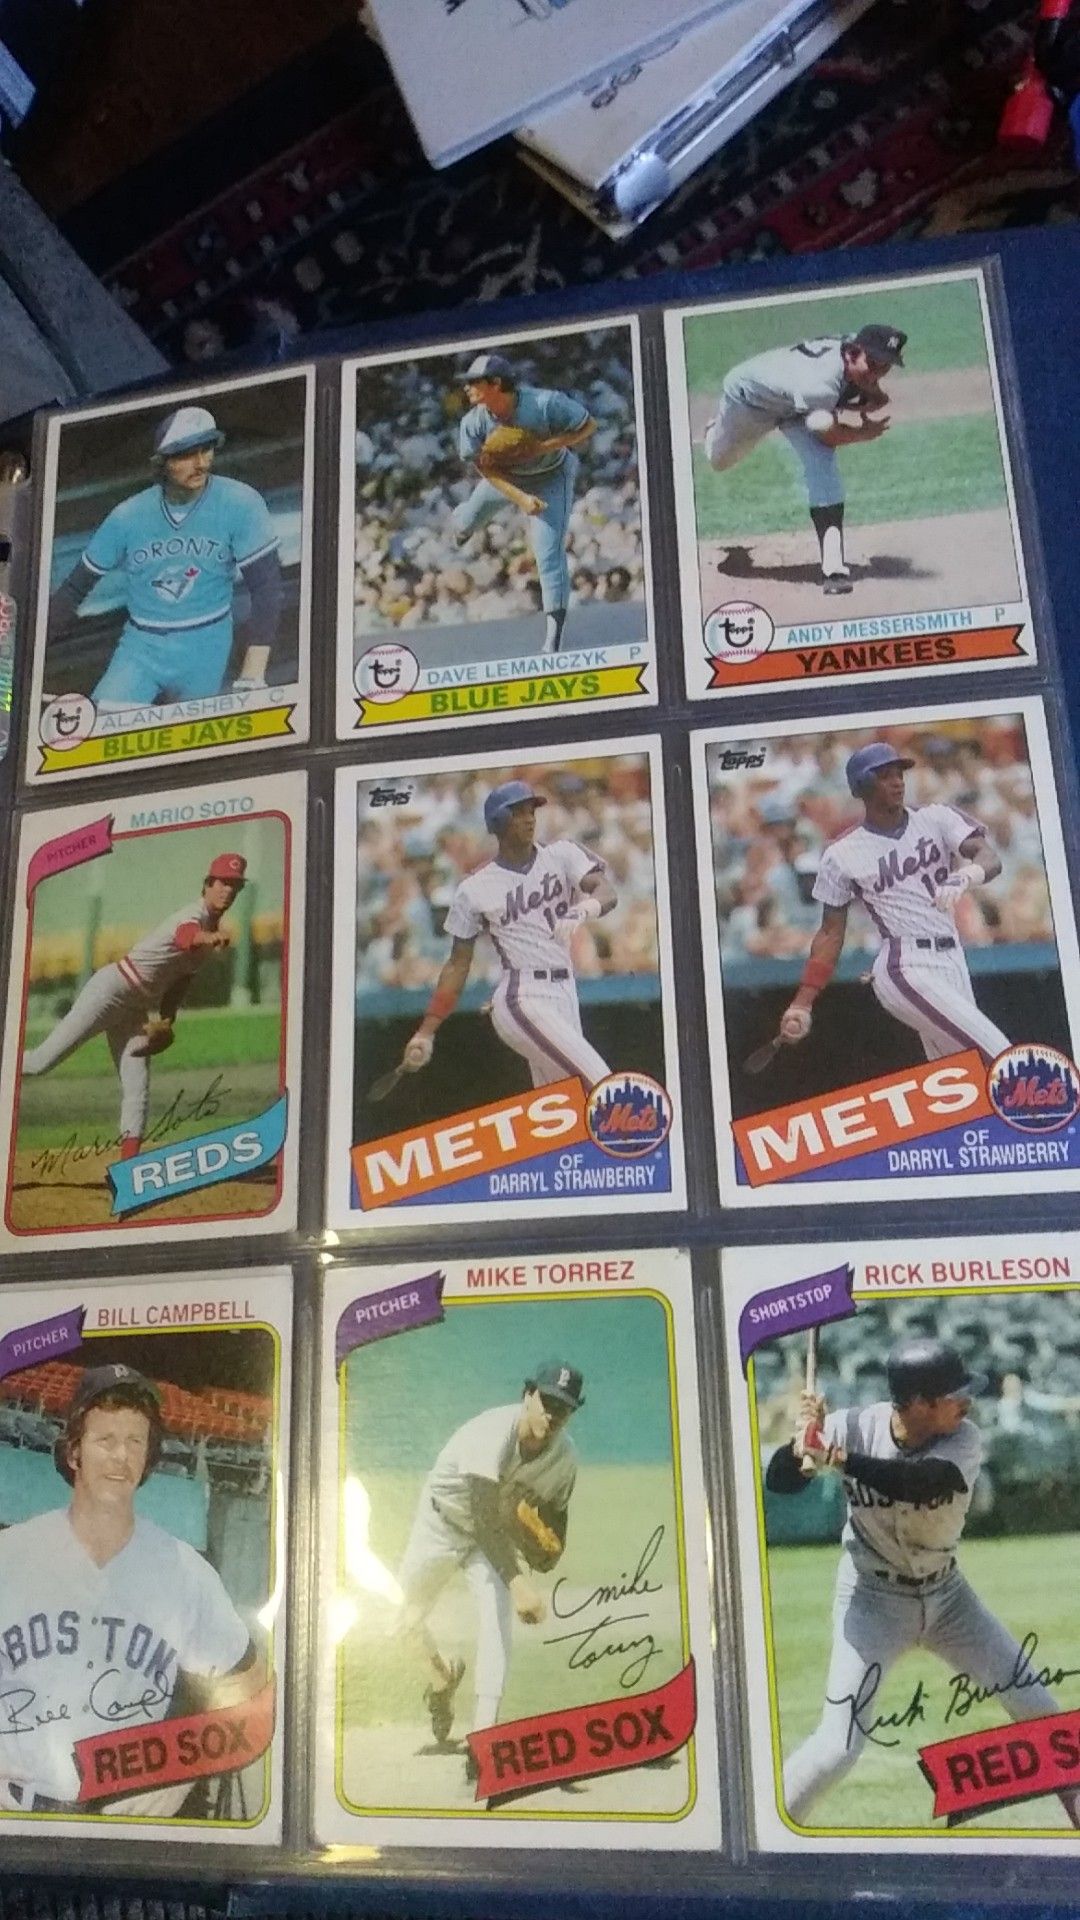 Some older cards everthing shown.